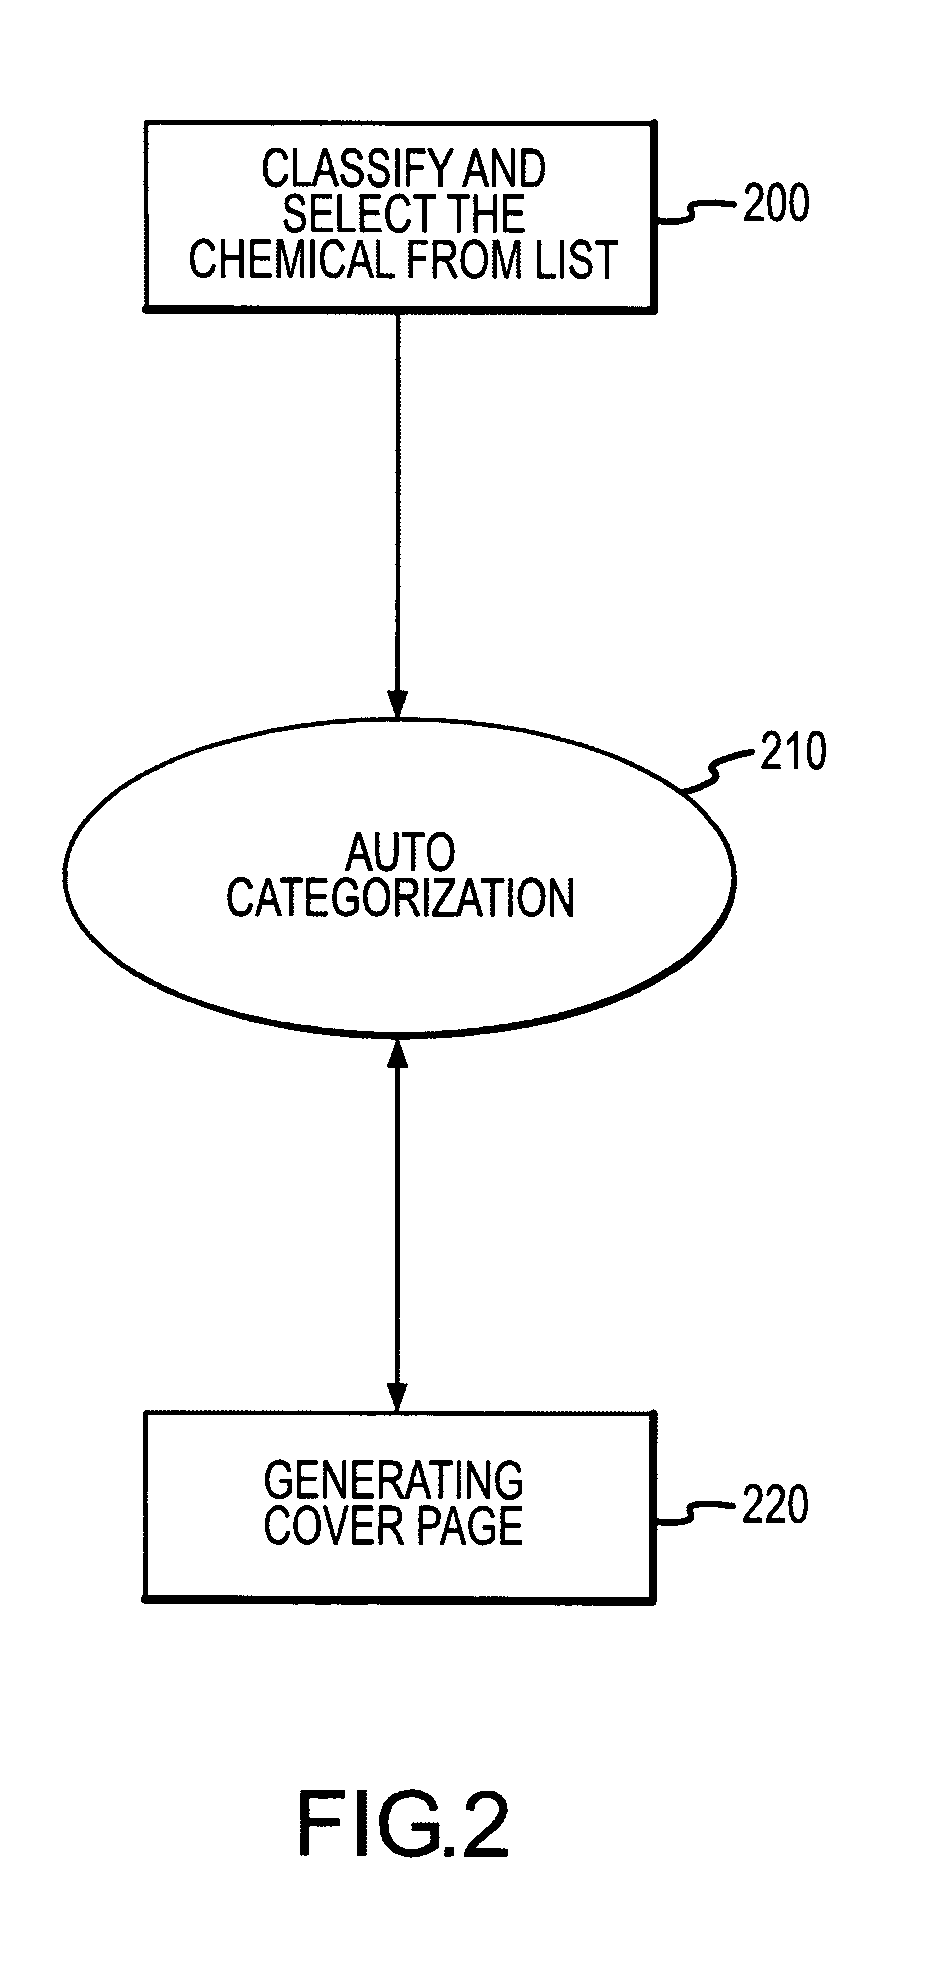 System and method for chemical hazard classification